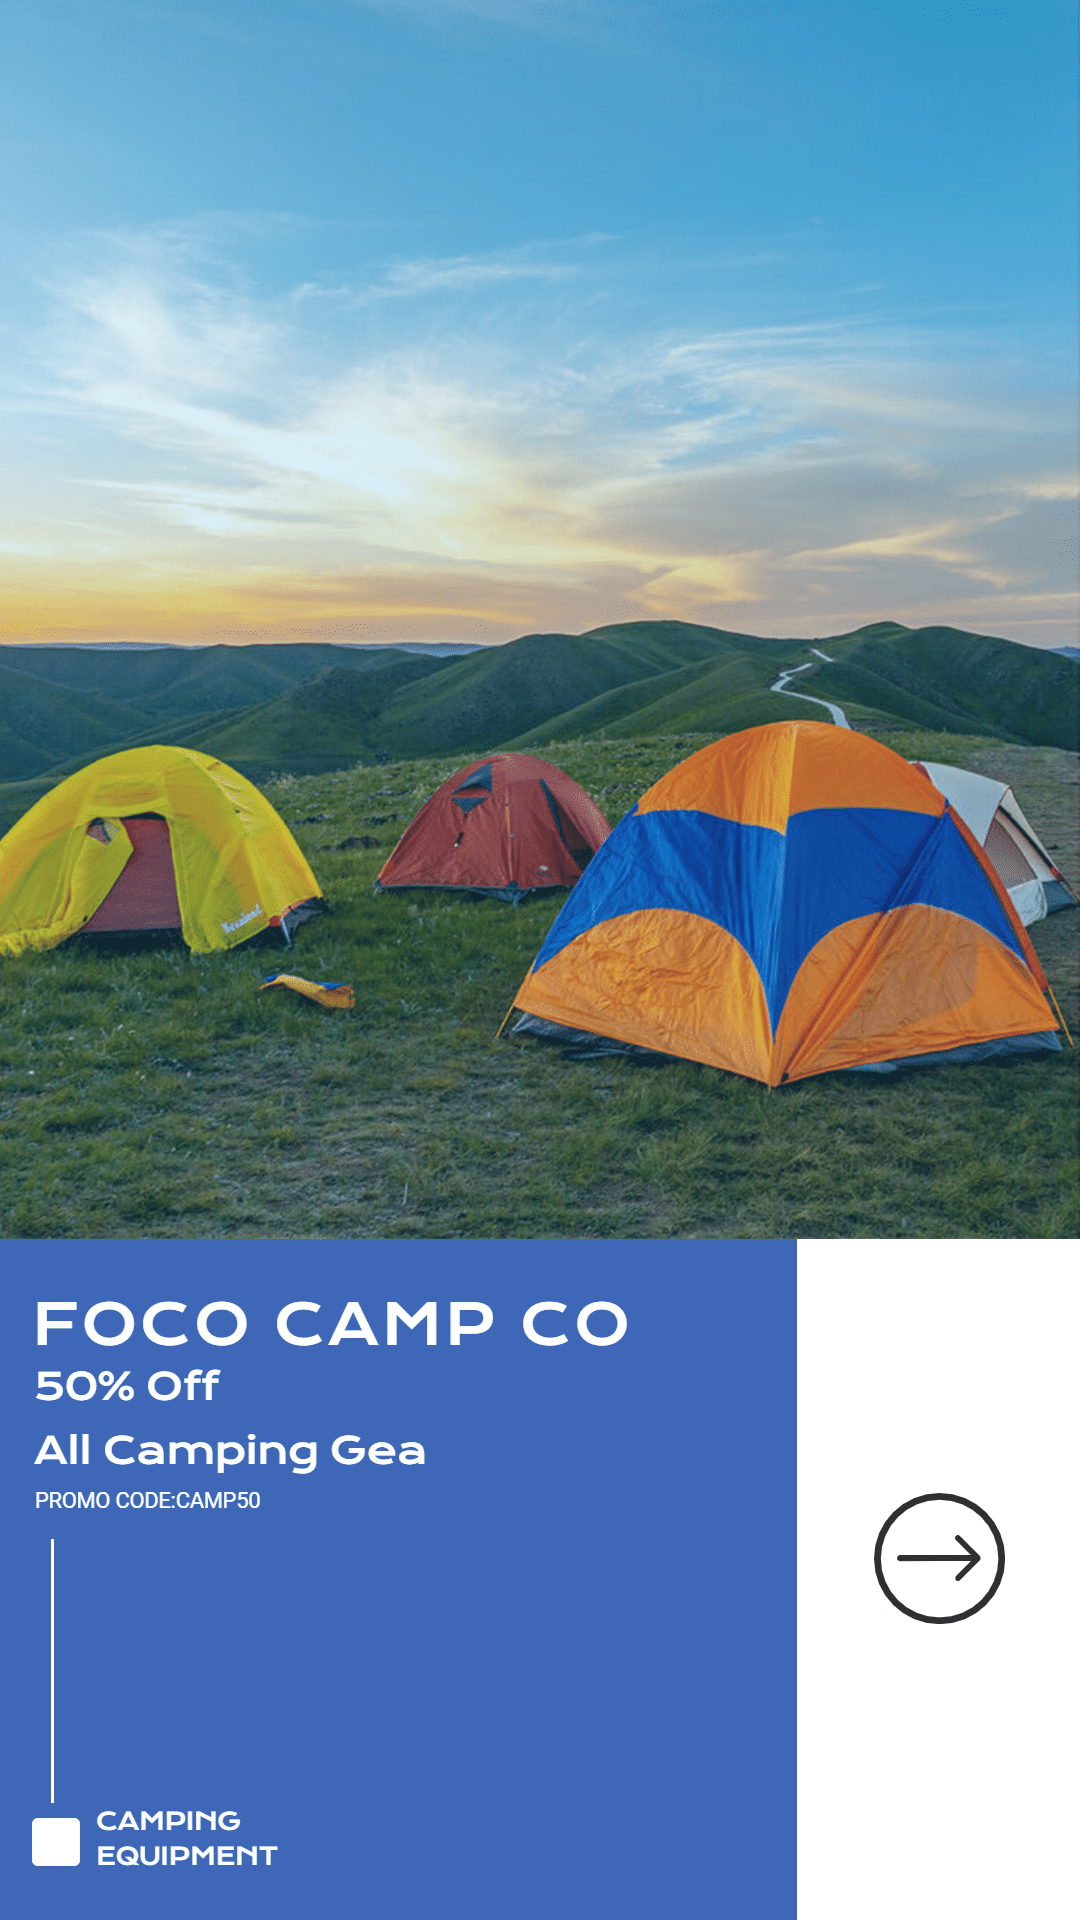 Simple Camping Equipment Discount Ecommerce Story